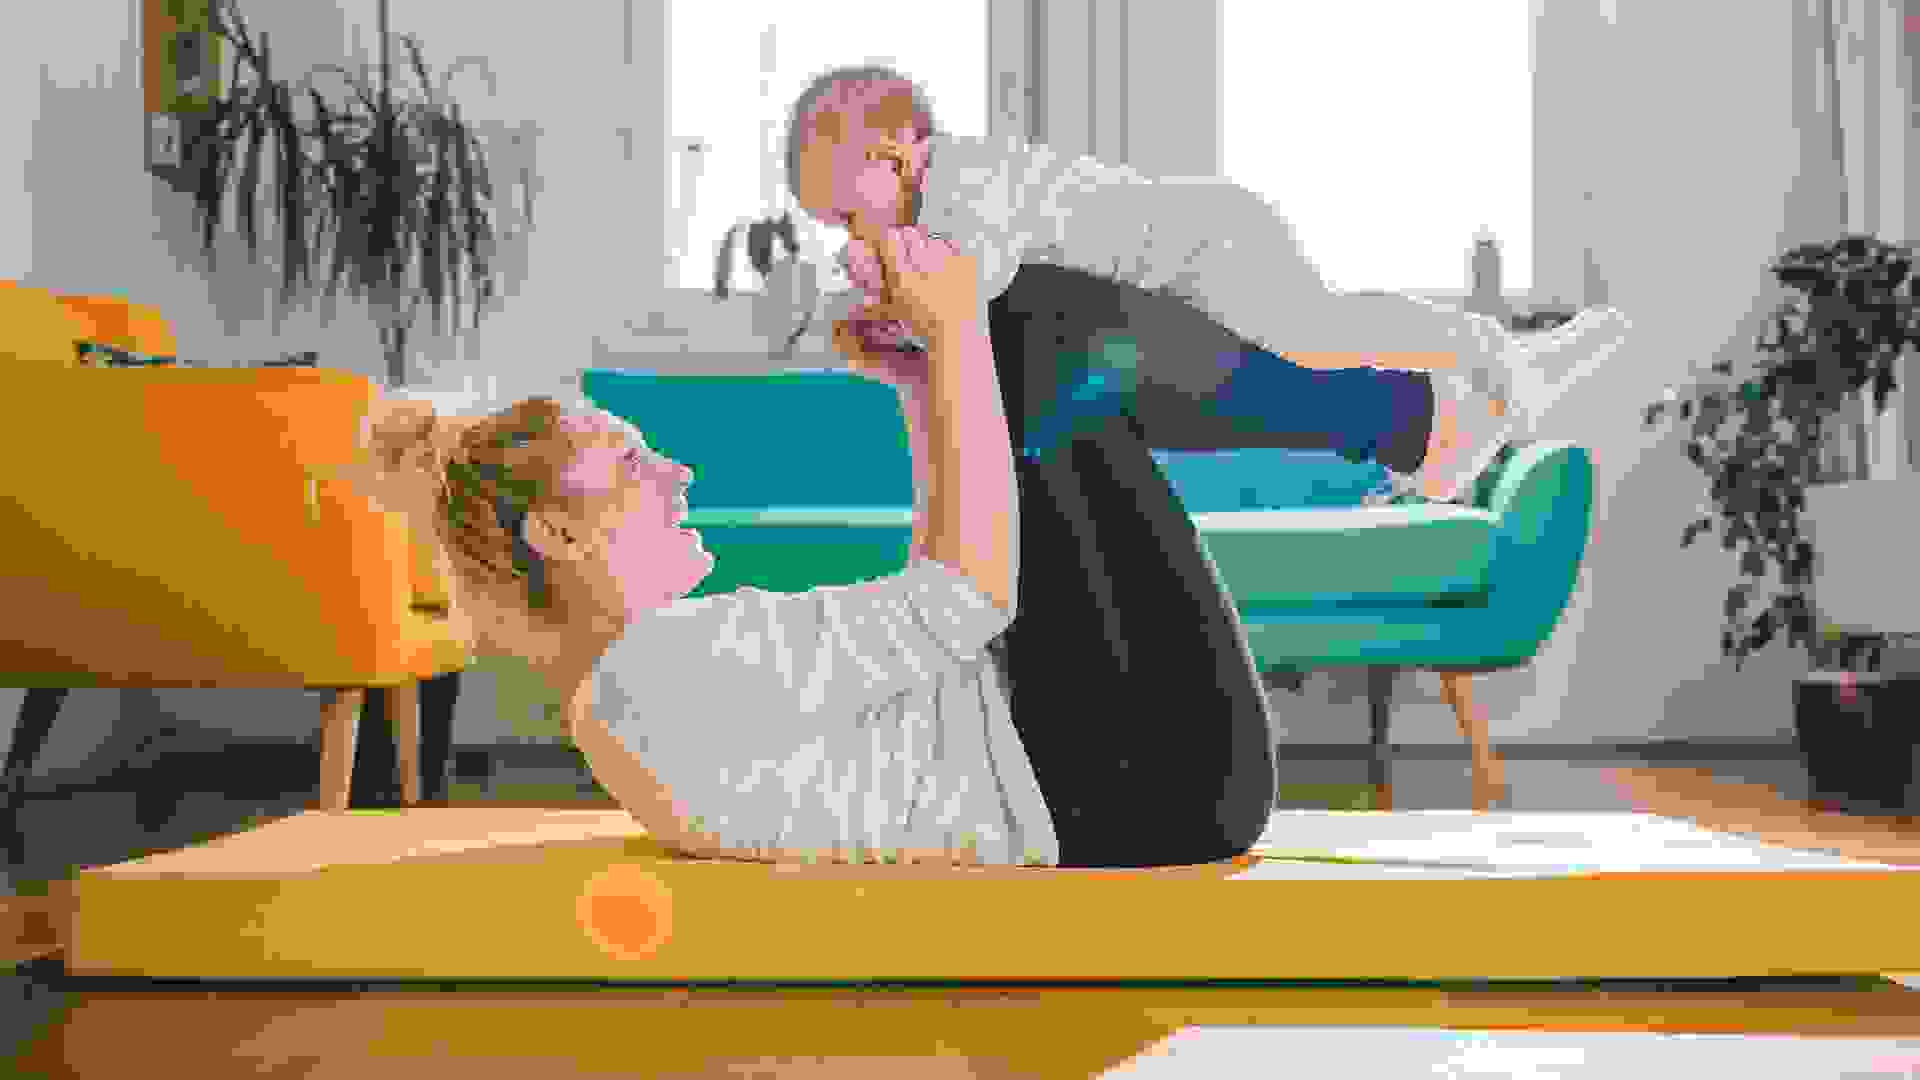 Mother Exercise With Her Baby on yellow mat At Home.